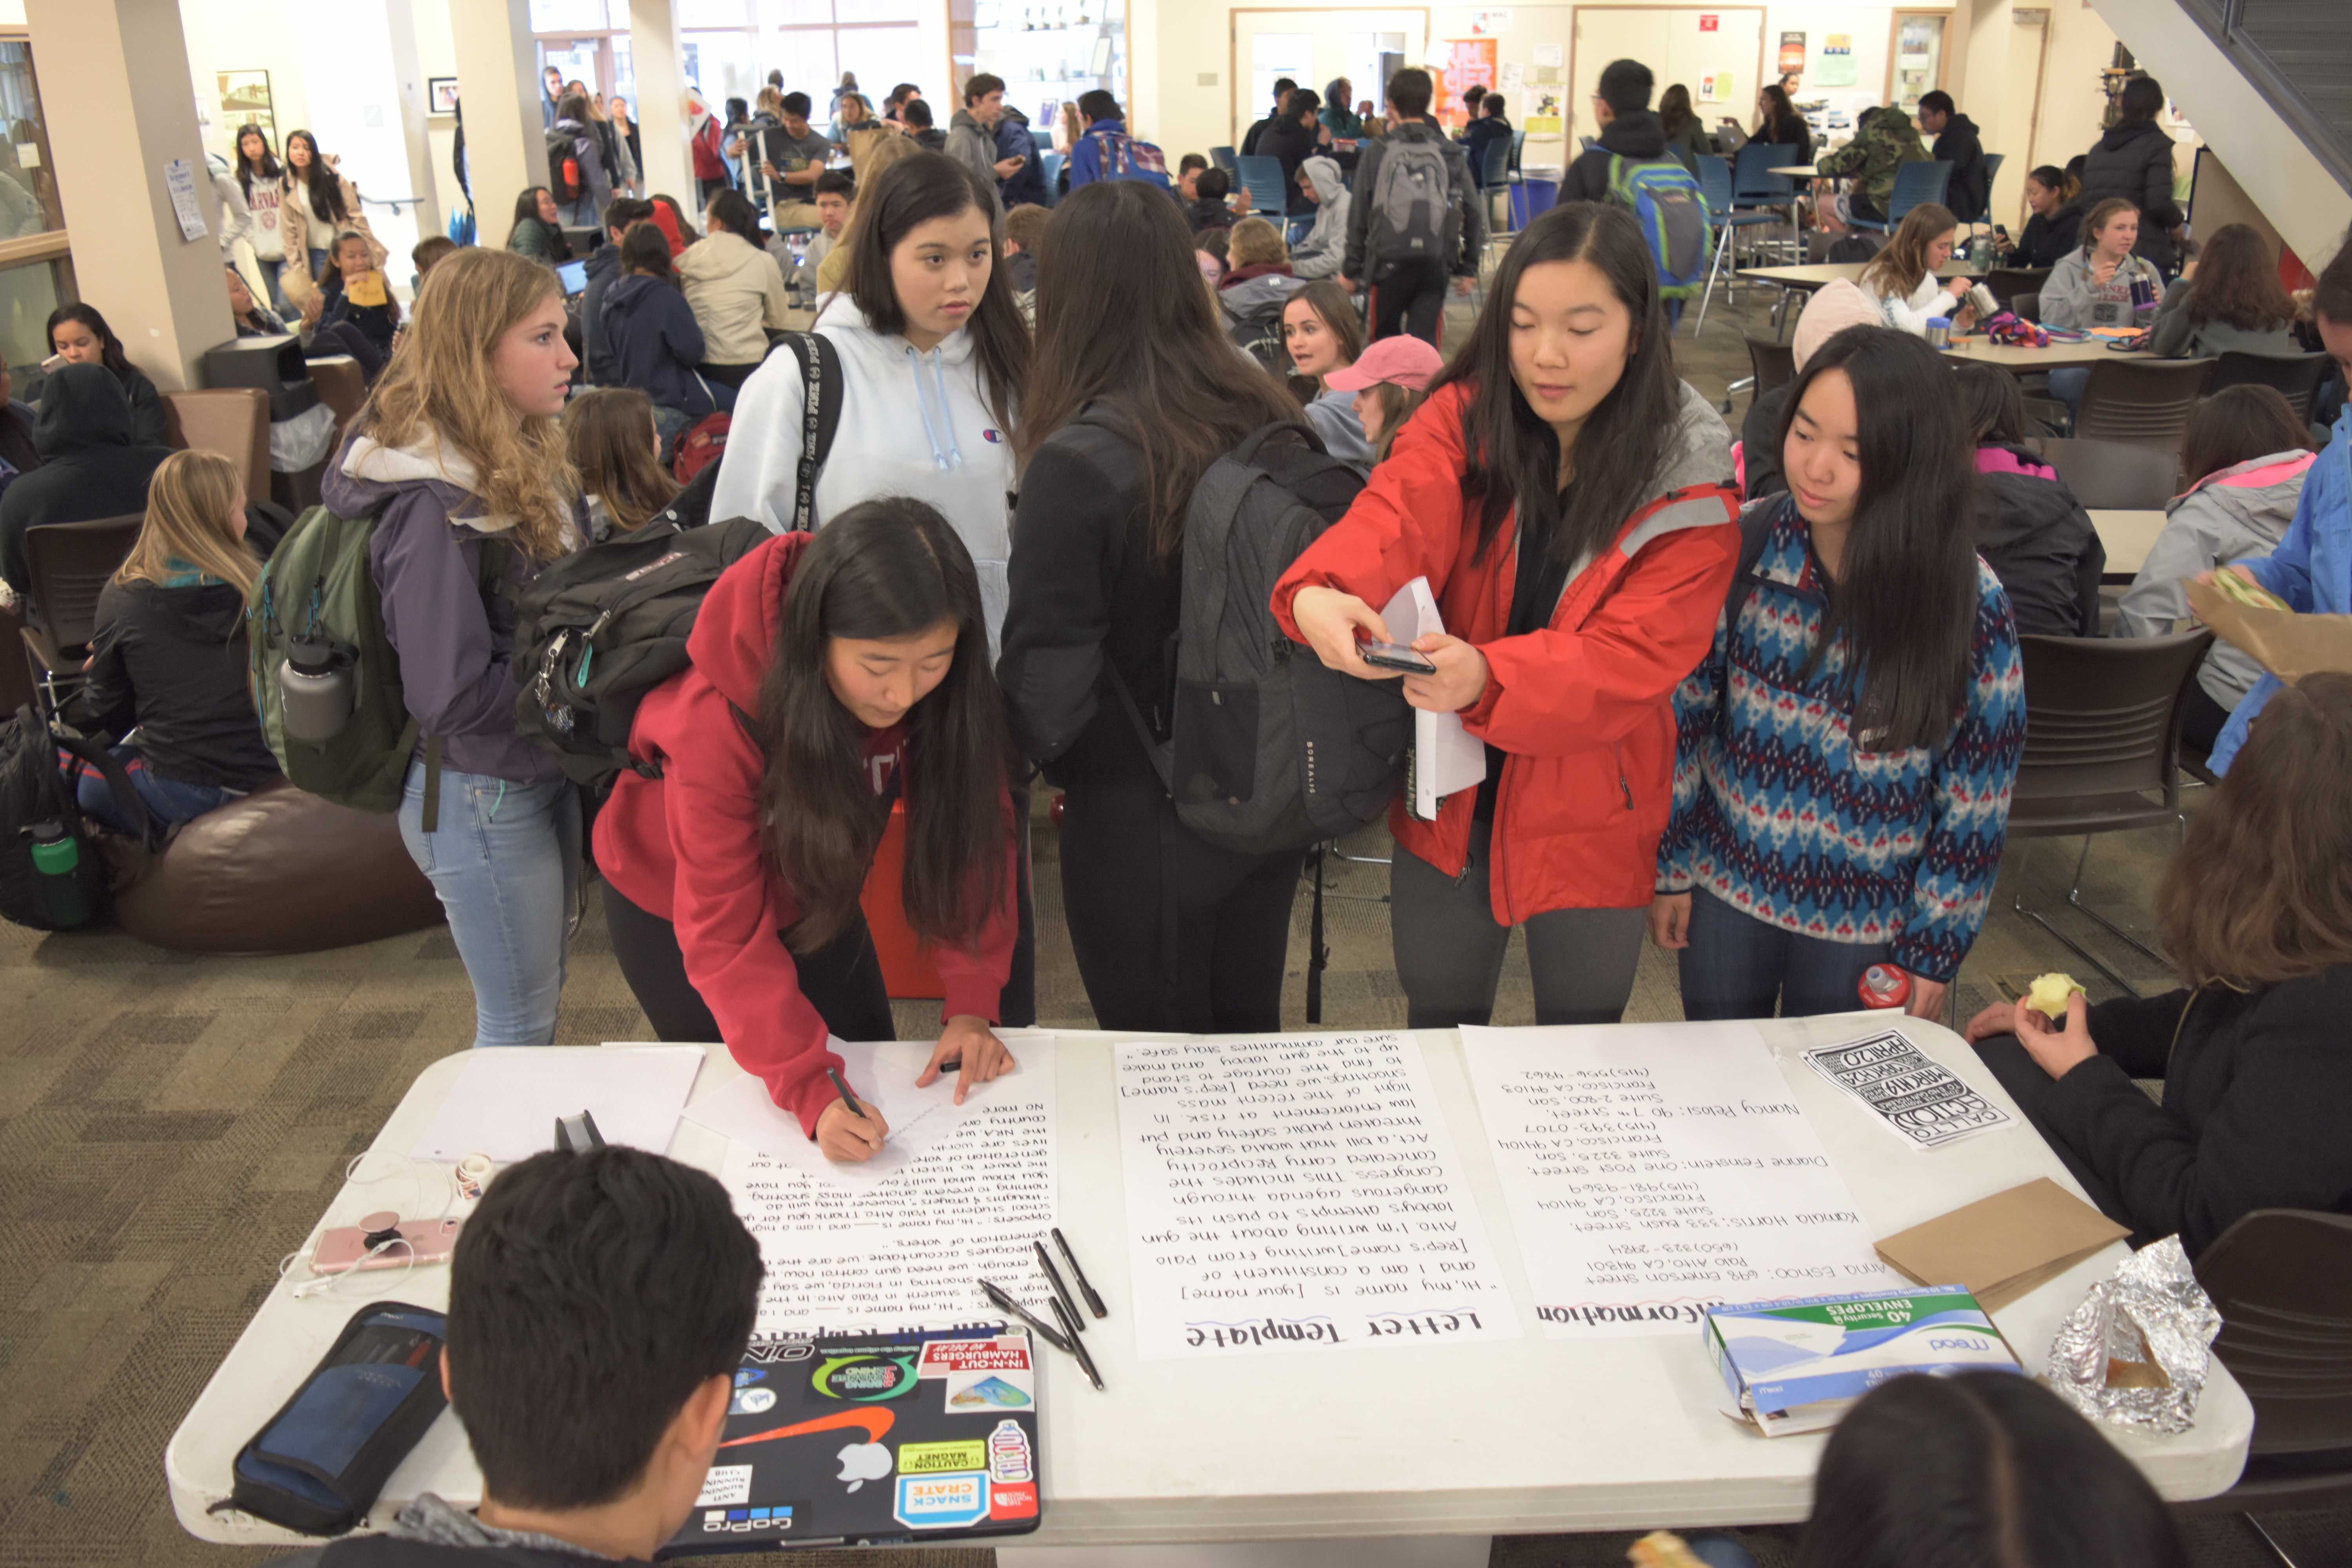 Palo Alto High School students participate in a student-led letter-writing and calling campaign organized in response to the high school shooting in Parkland, Florida. According to senior Noga Hurwitz, the campaign aims to send 500 letters to members of Congress including Anna Eshoo, Kamala Harris, Diane Fienstein and Nancy Pelosi. Photo: Nisha McNealis 